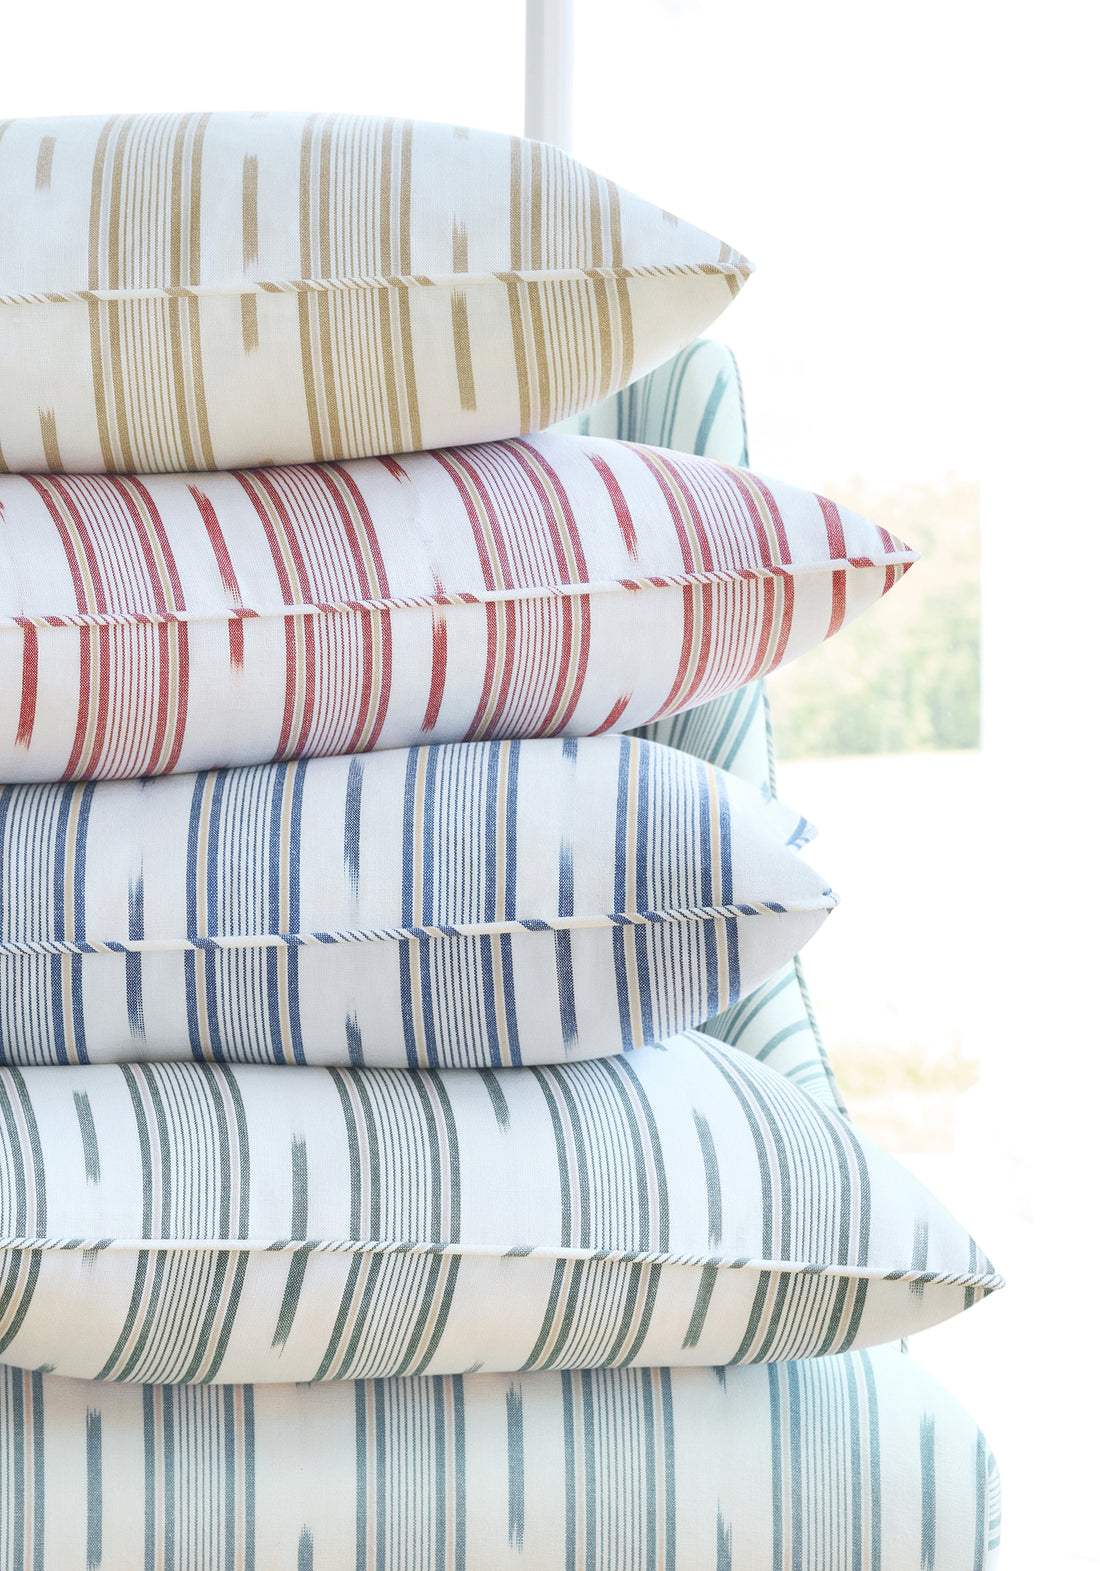 Pillows in Odeshia Stripe fabric in sunbaked color- pattern number W781309 - by Thibaut in the Montecito collection